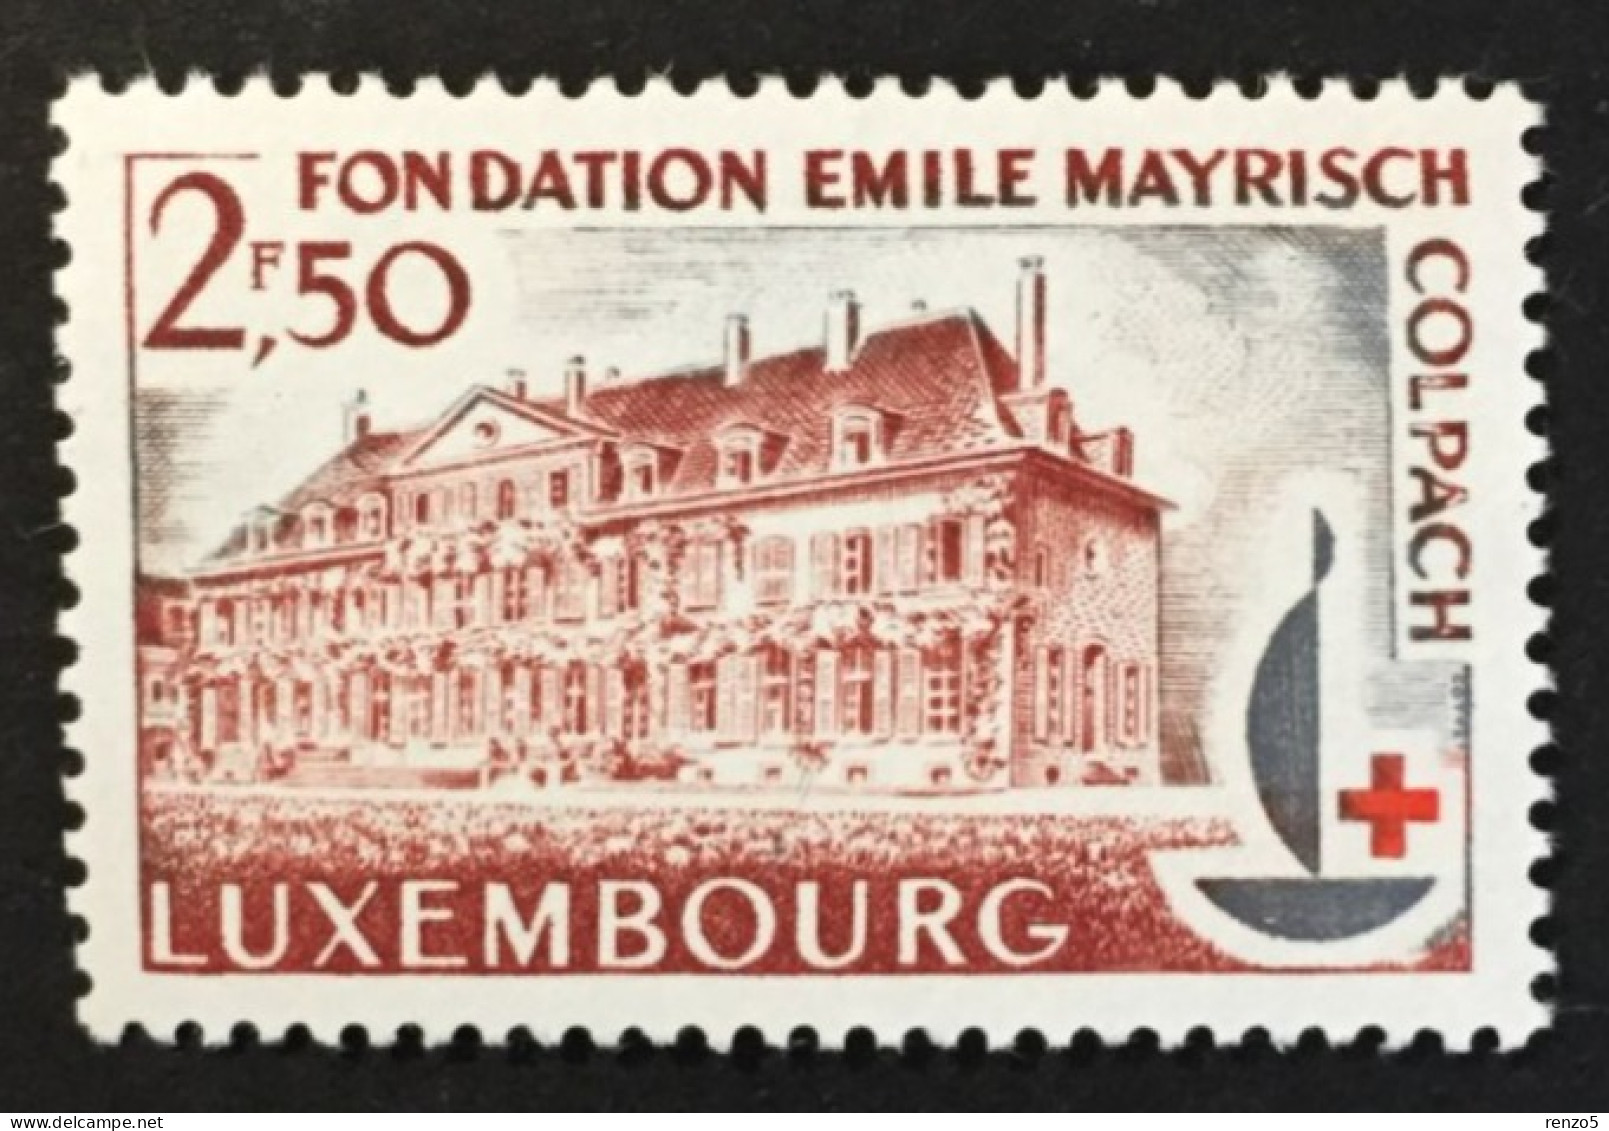 1963 Luxembourg - Colpach Castle And The Centenary Emblem Red Cross - Unused ( Imperfect Gum ) - Nuevos